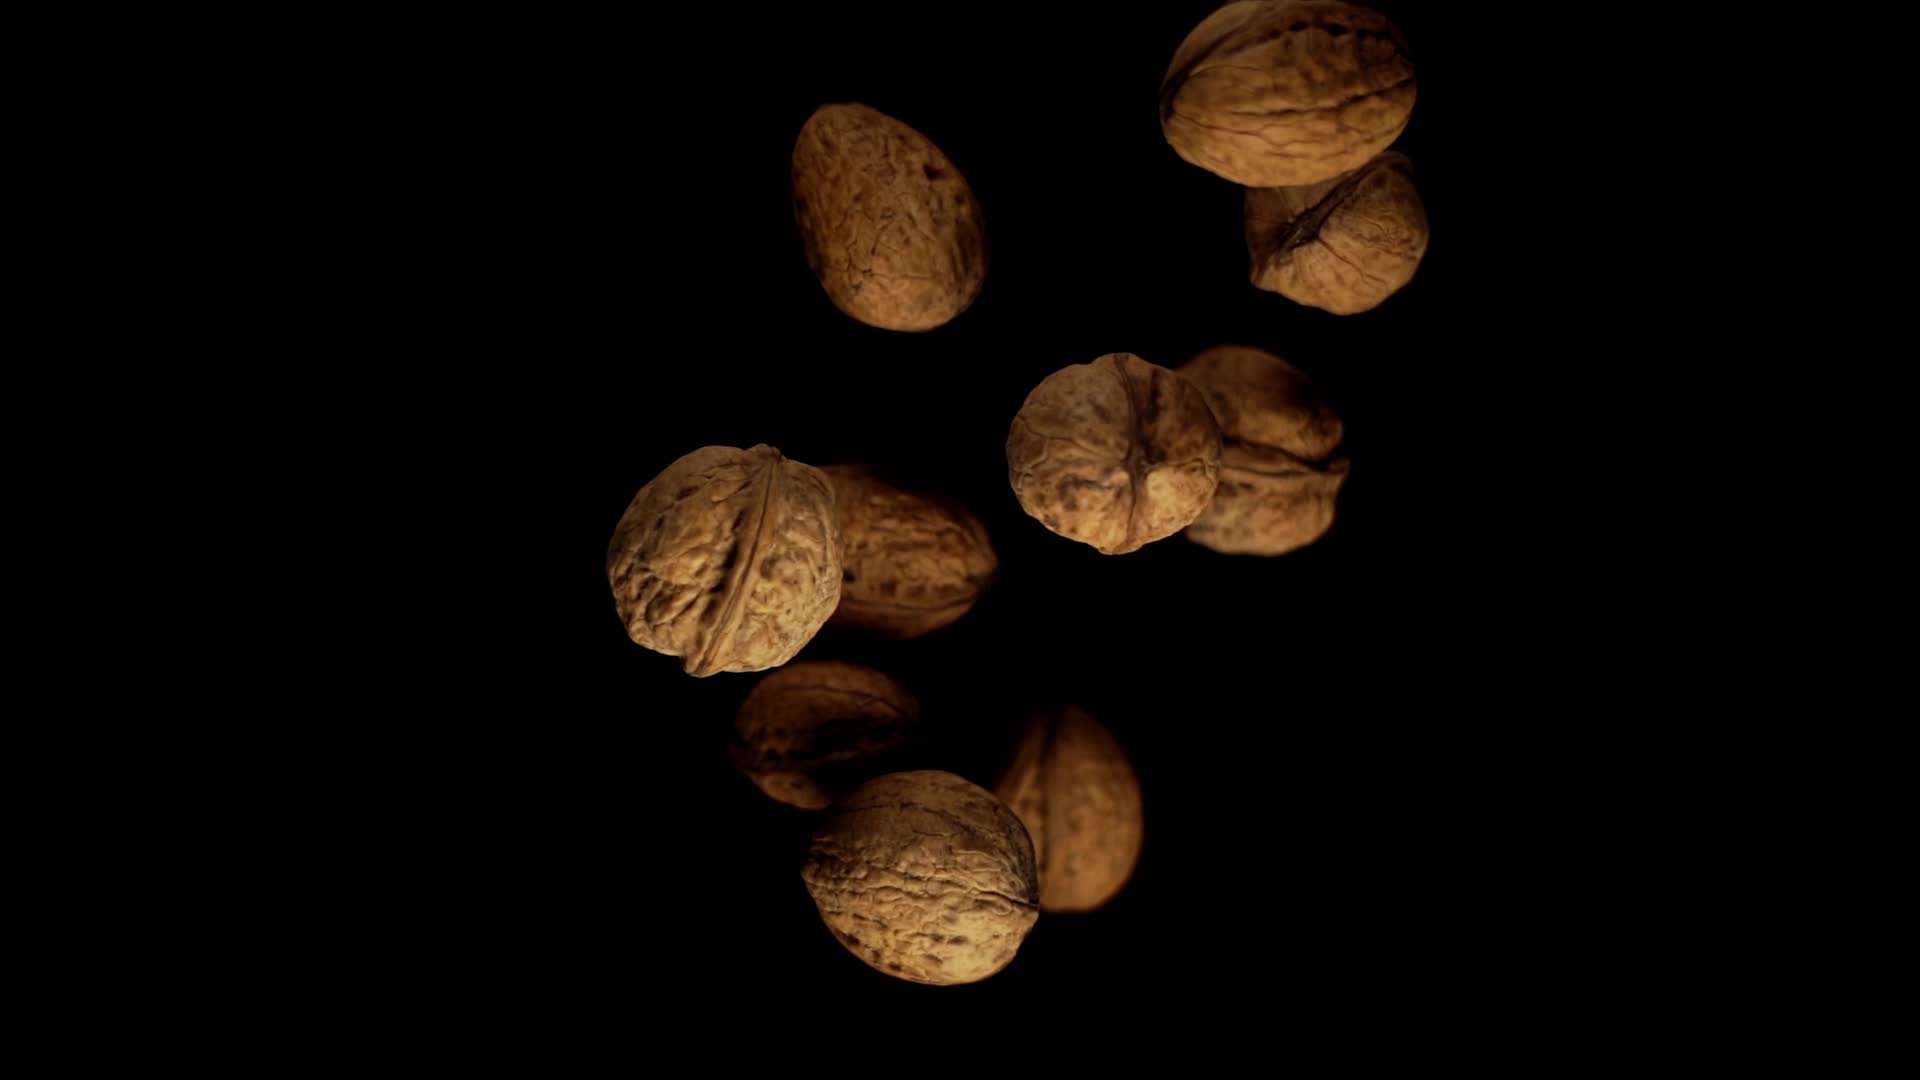 Healthy walnuts with shells of brown colour fall under light